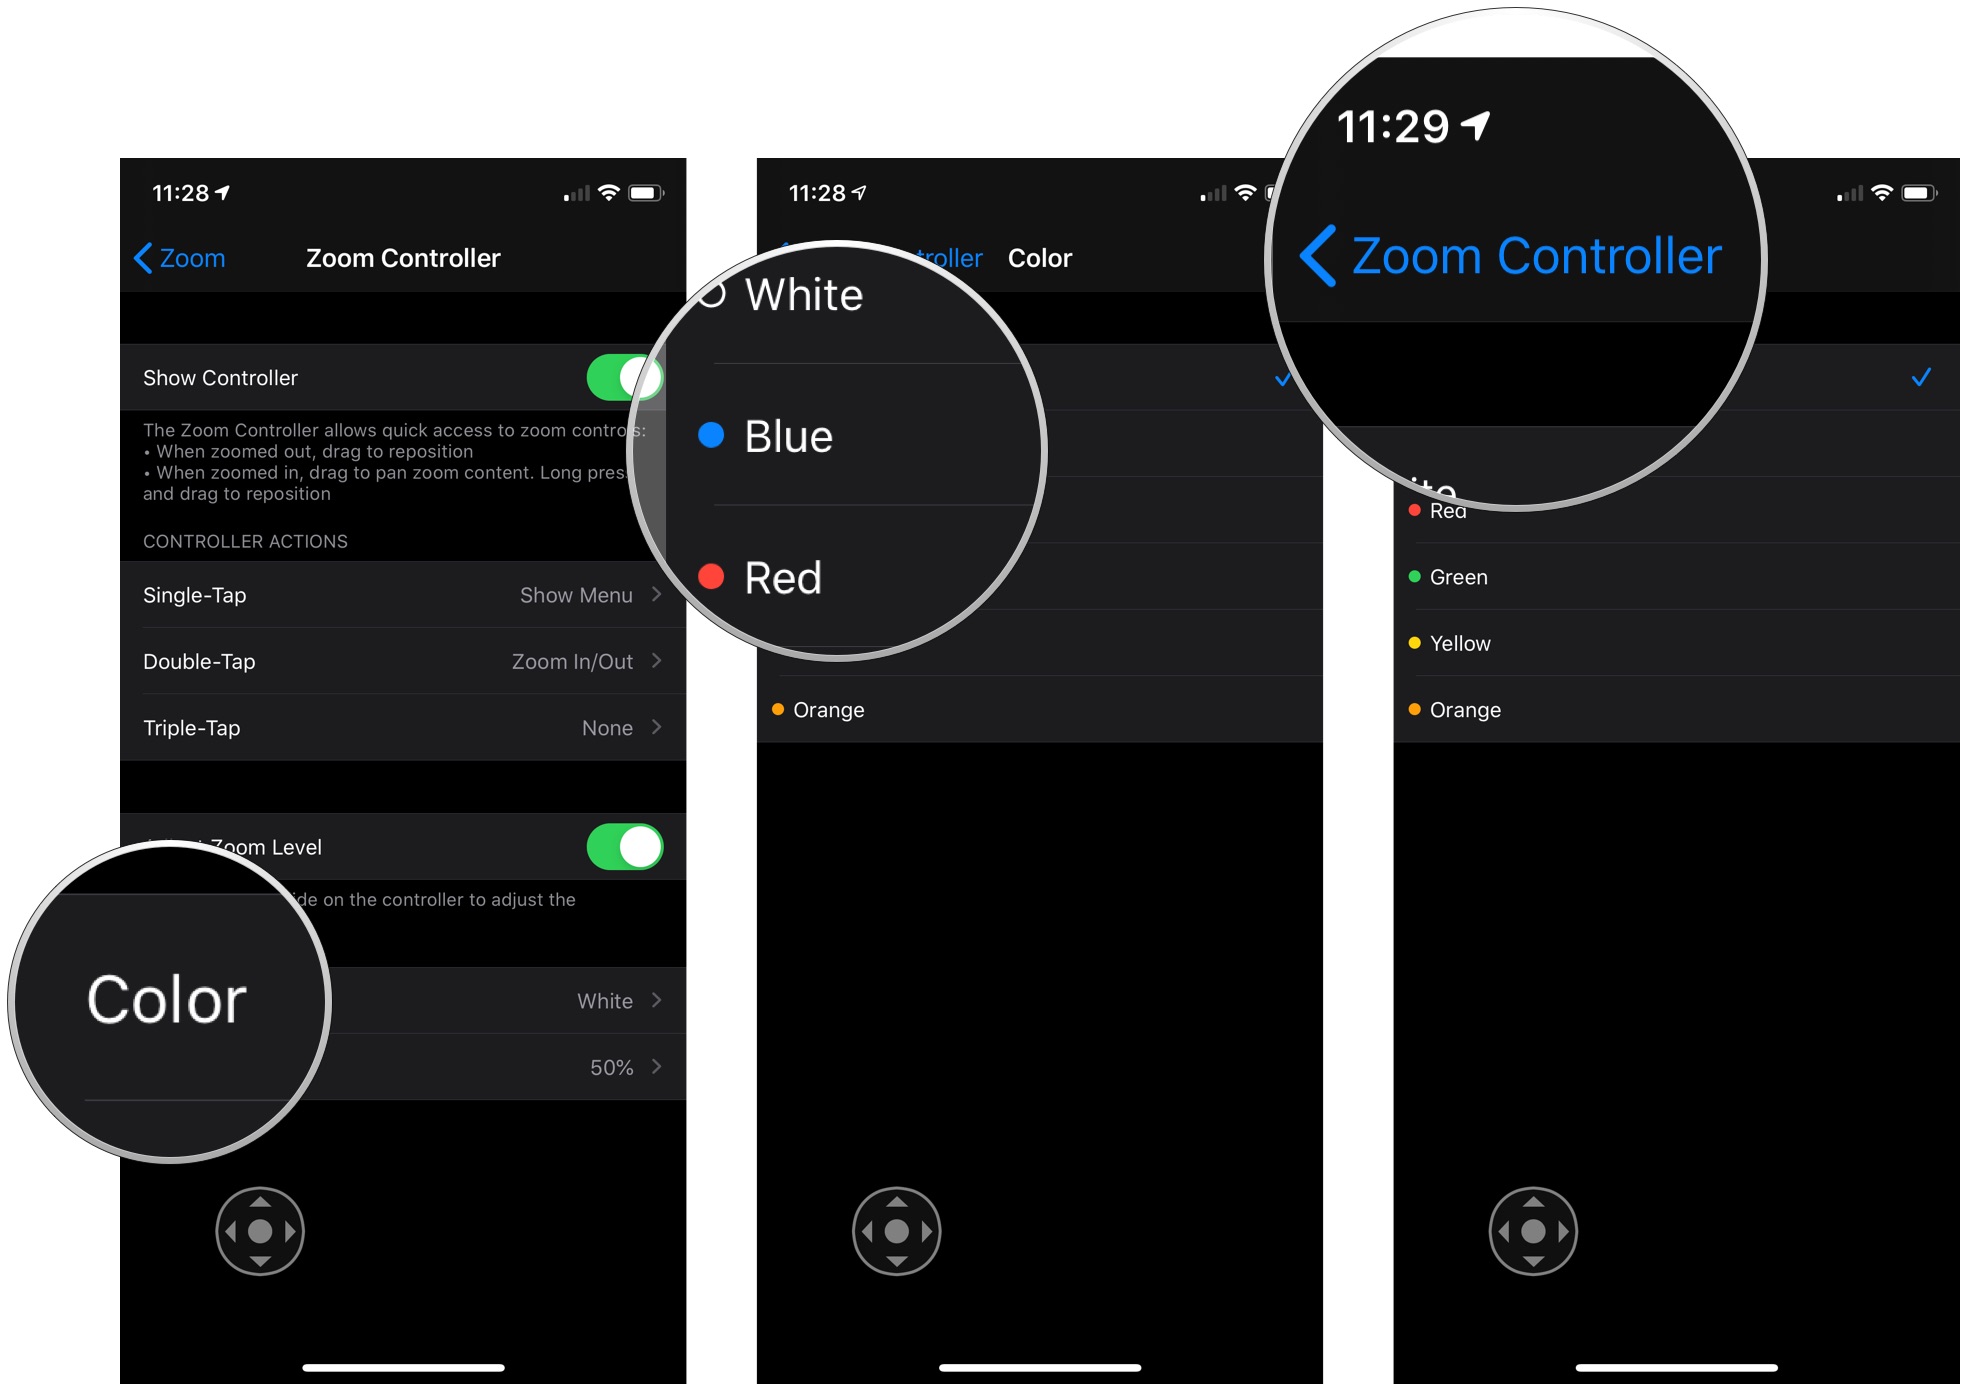 Enable the zoom controller that shows how to touch Color, touch the color that you want the zoom controller to touch, and then touch Zoom controller to go back